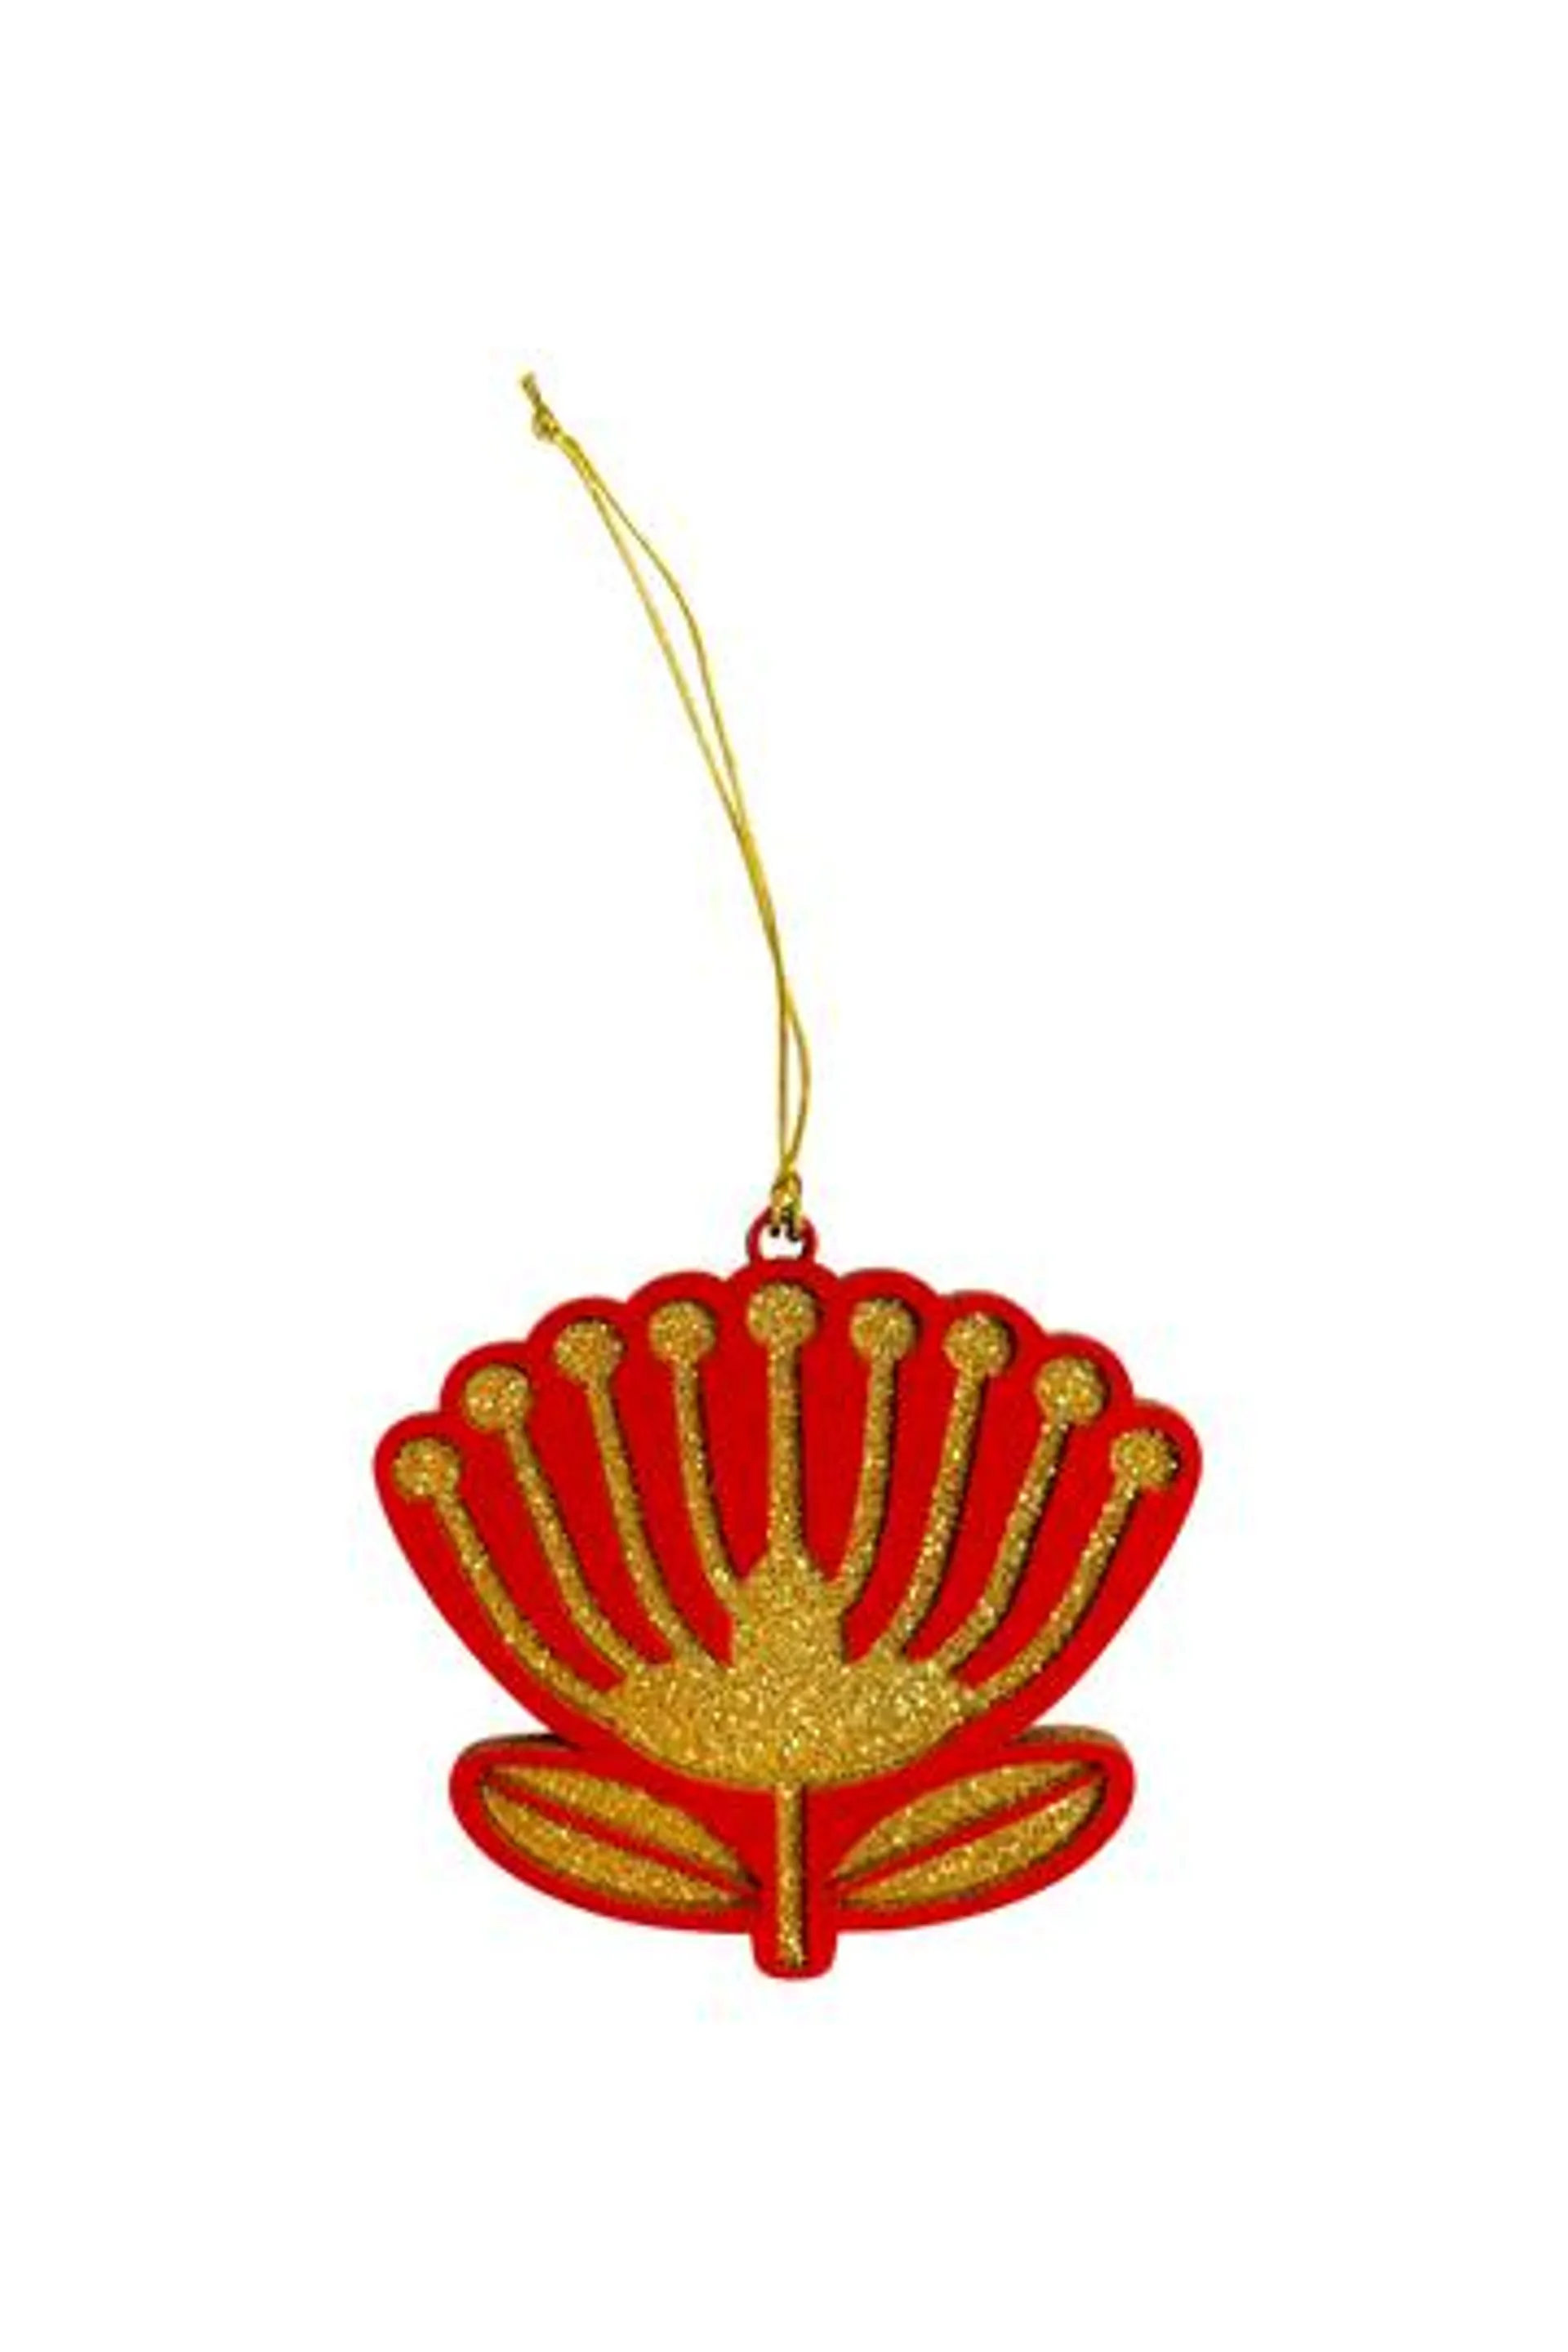 DQ & Co. Decoration Flock Pohutukawa Red & Gold